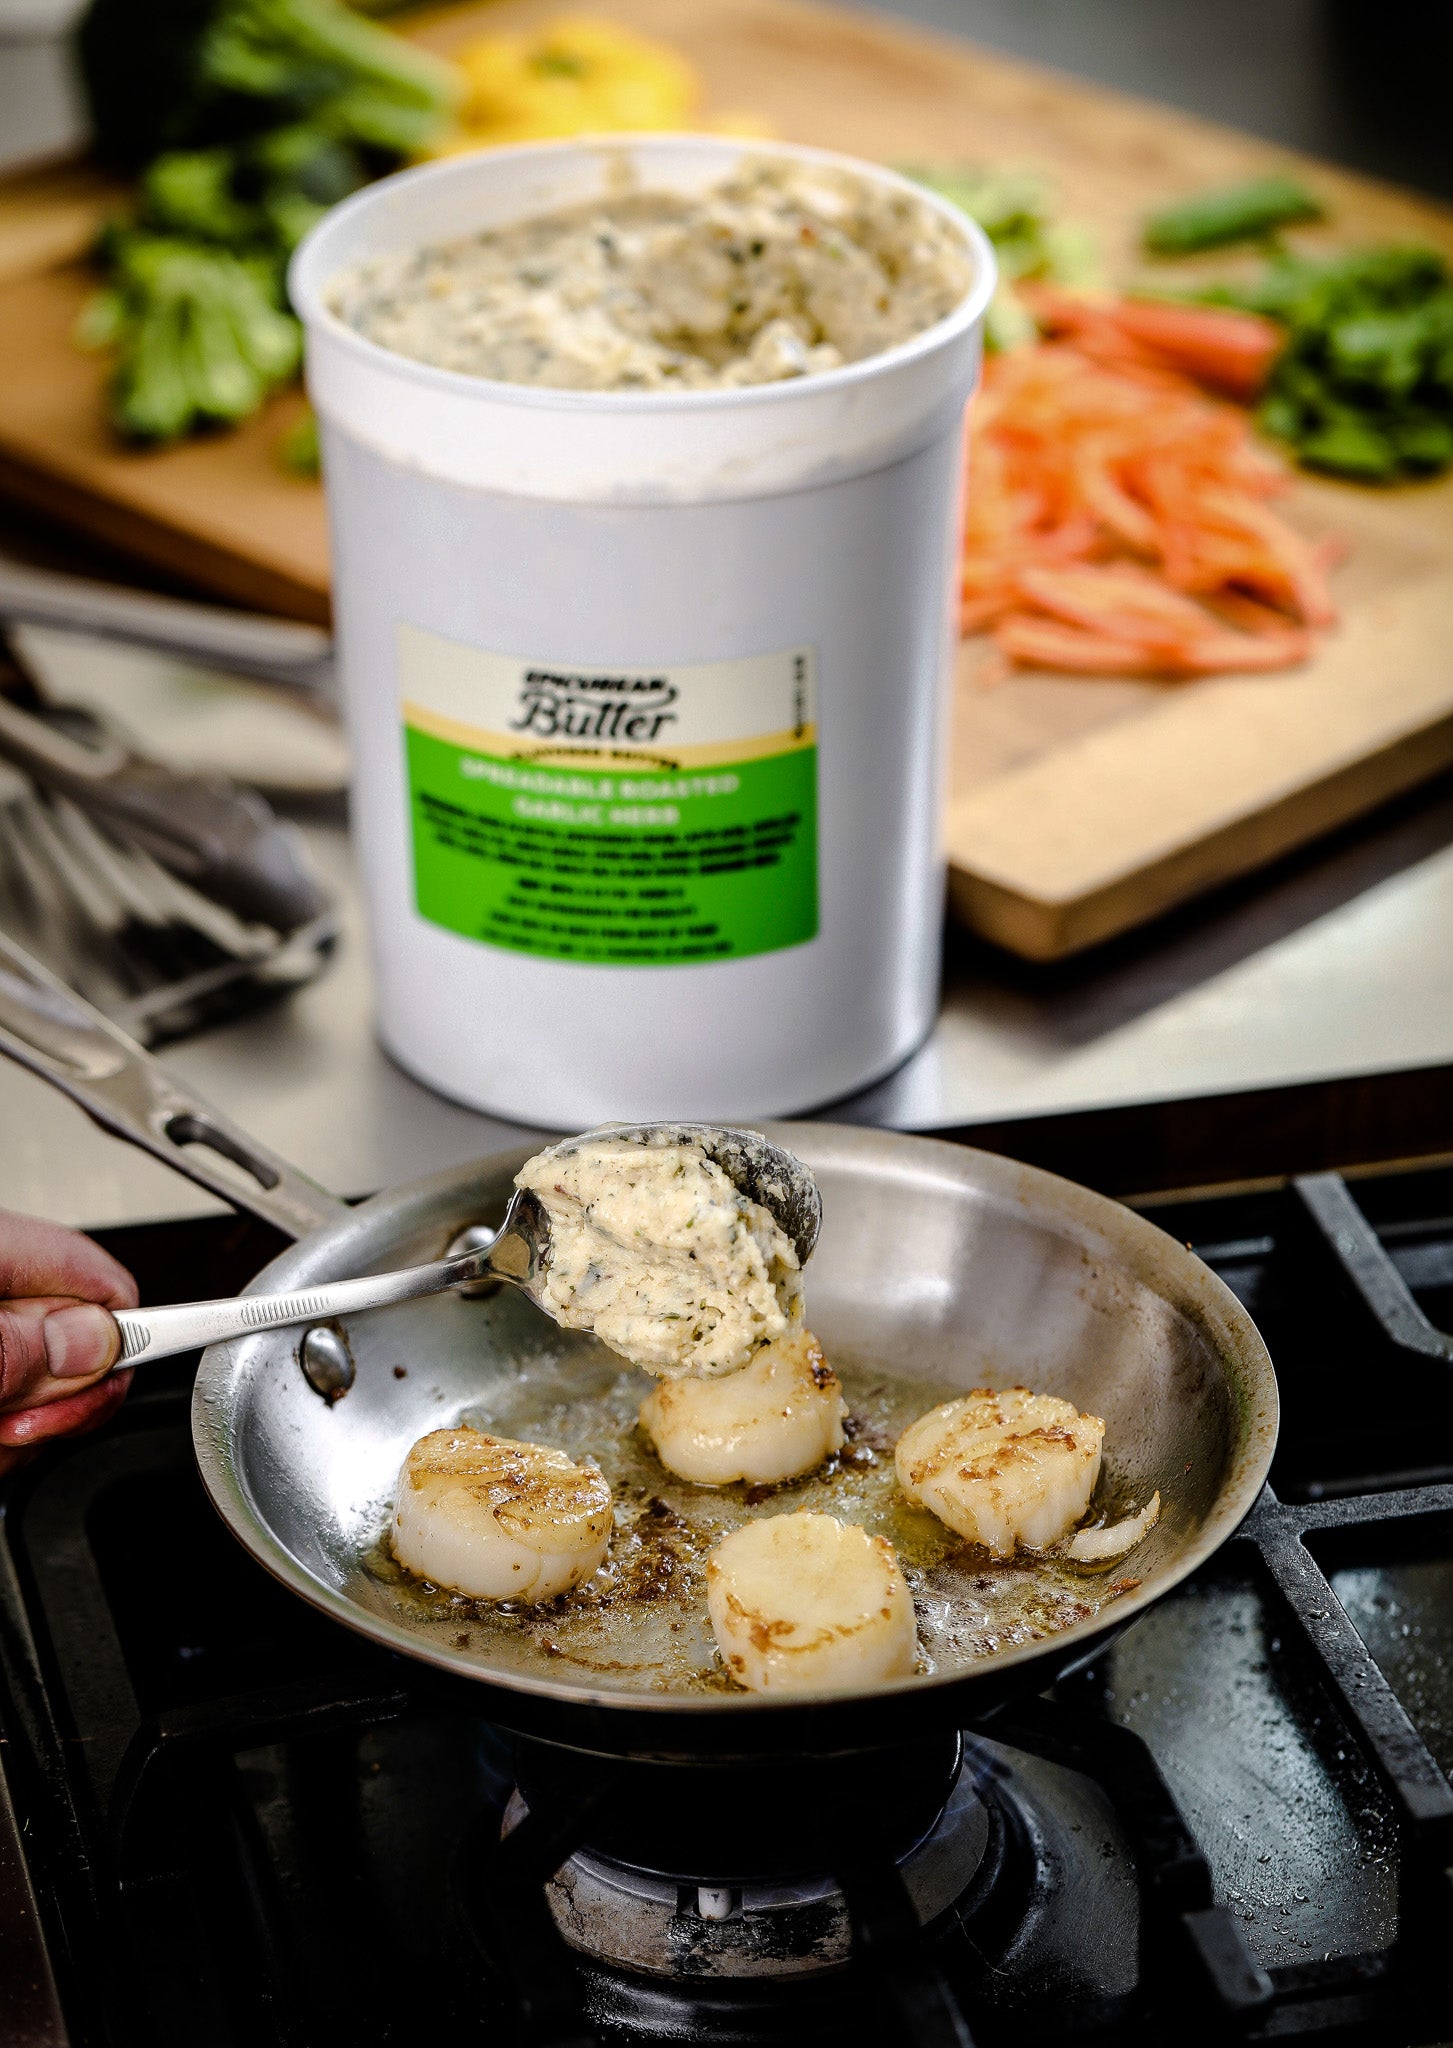 Chef cooking with 5 lb Epicurean Butter Roasted Garlic Herb Flavored Butter